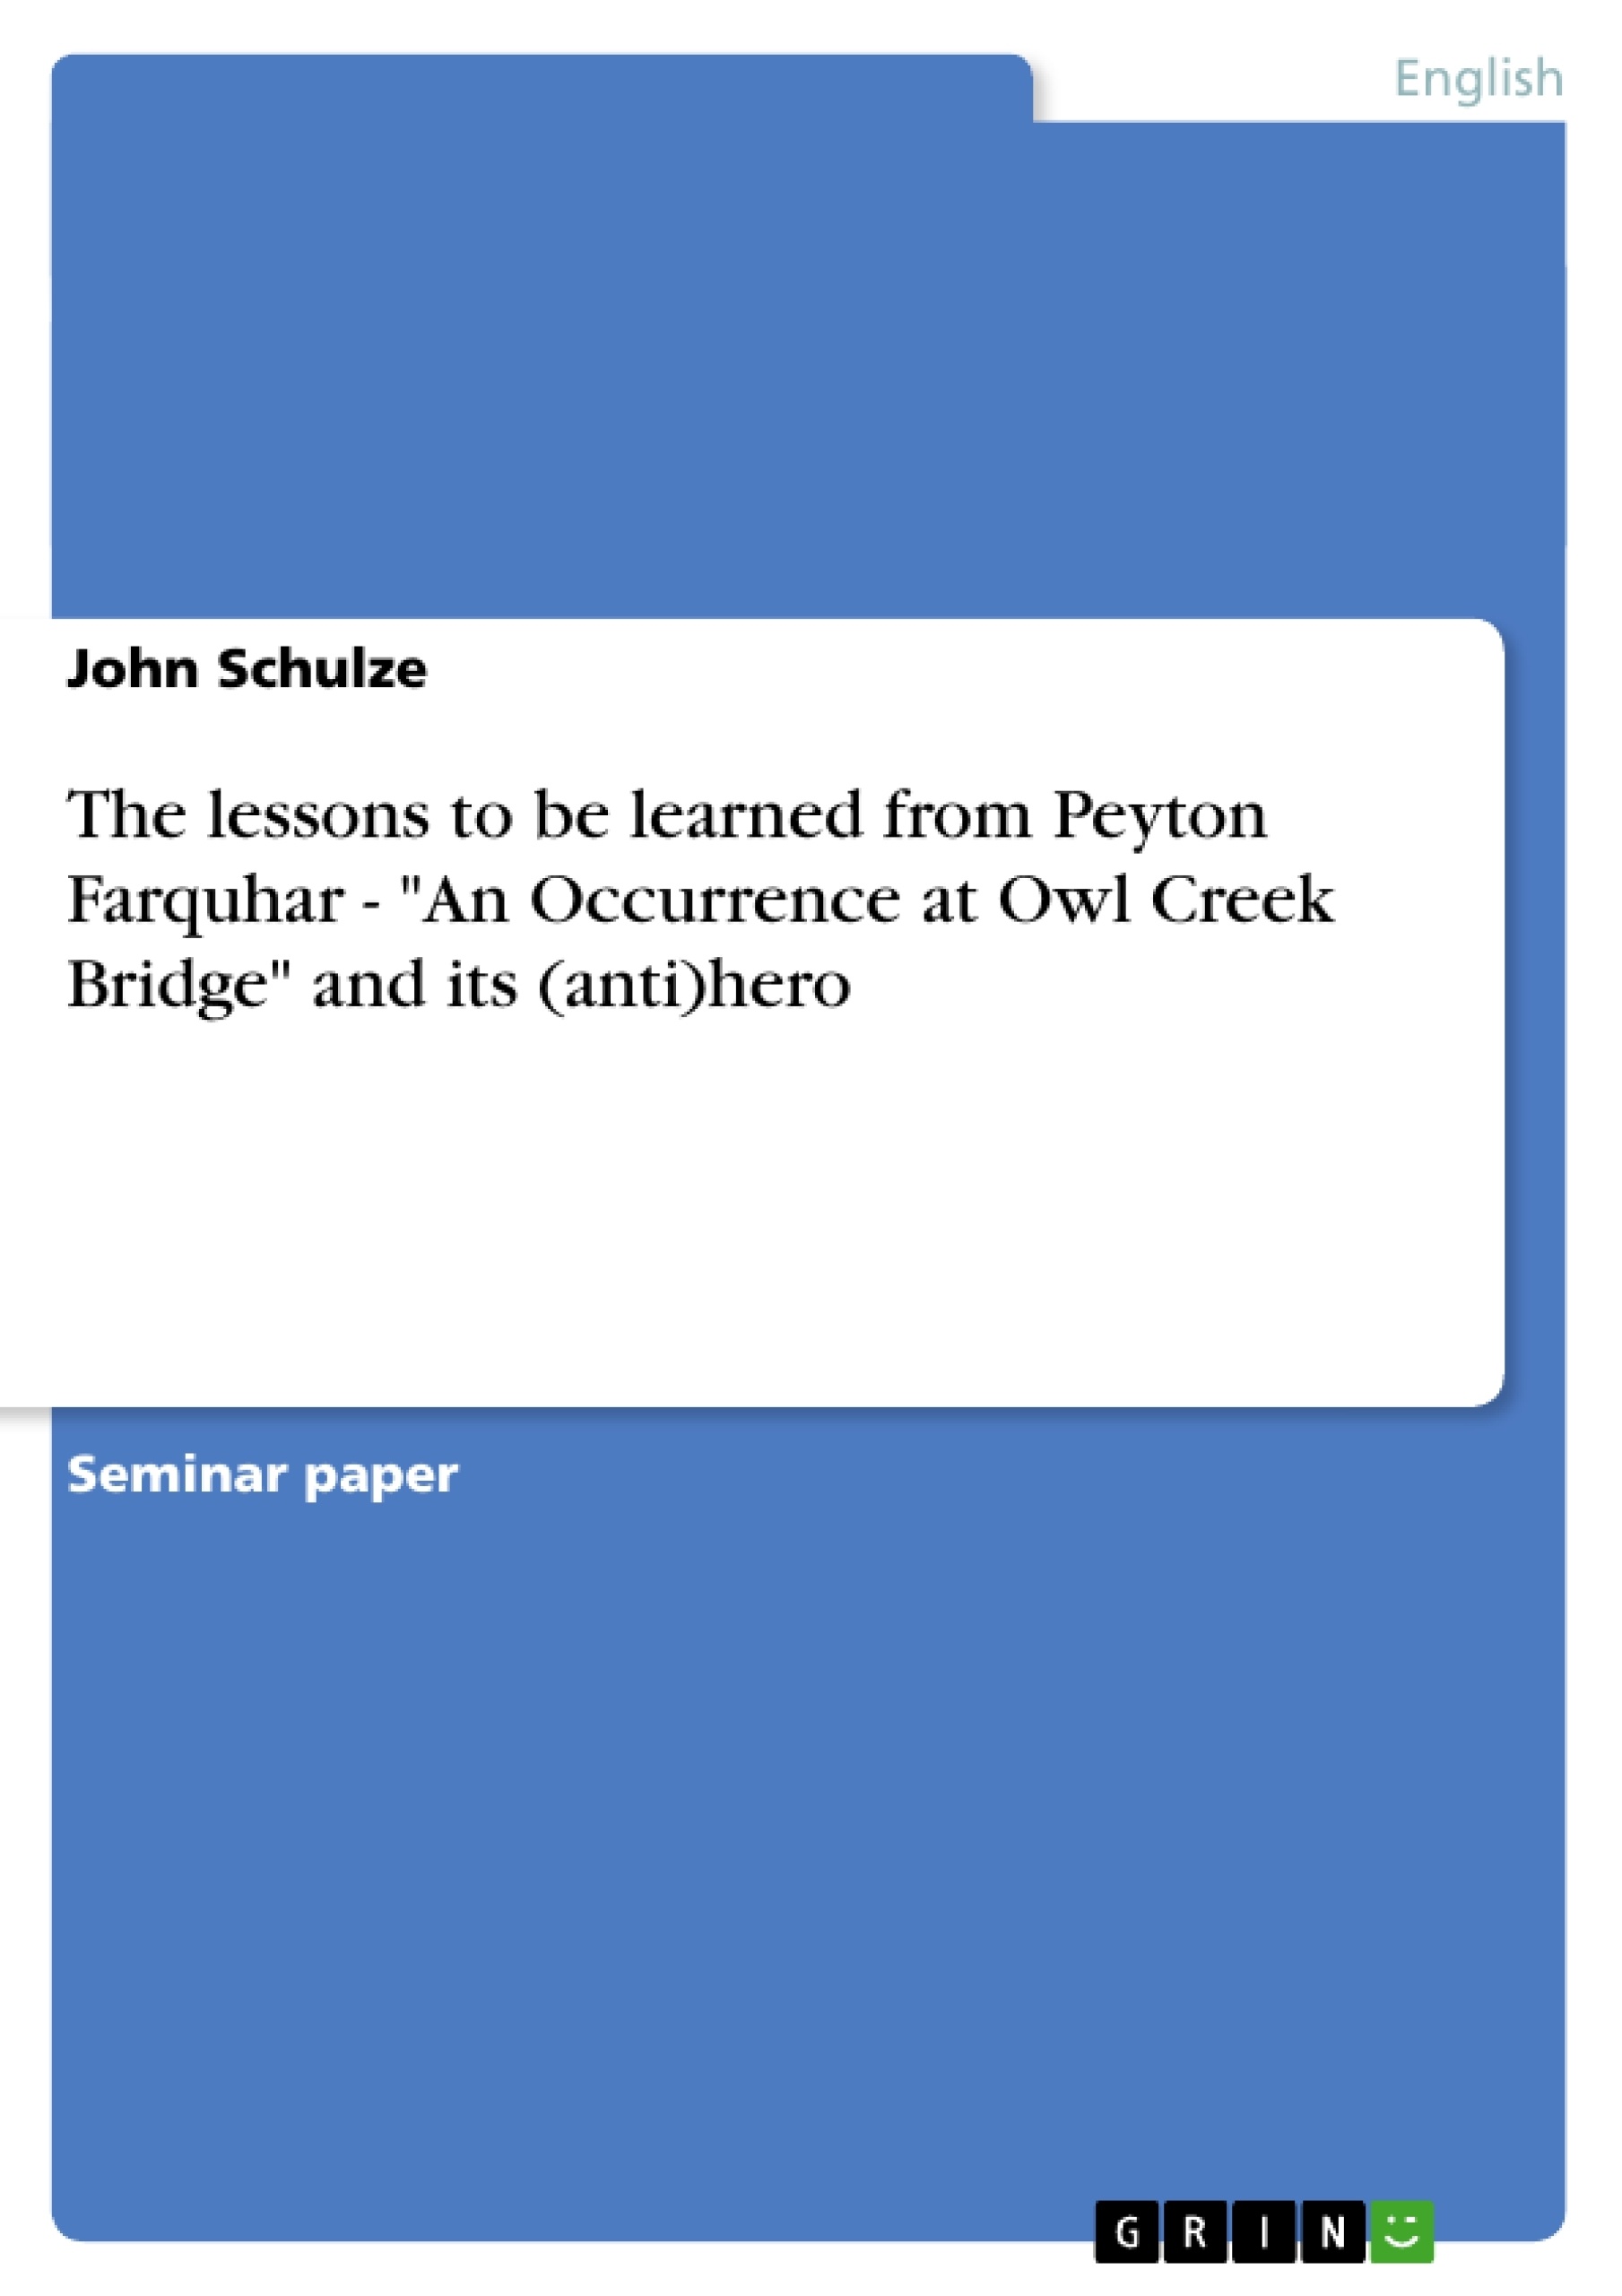 Titel: The lessons to be learned from Peyton Farquhar - "An Occurrence at Owl Creek Bridge" and its (anti)hero